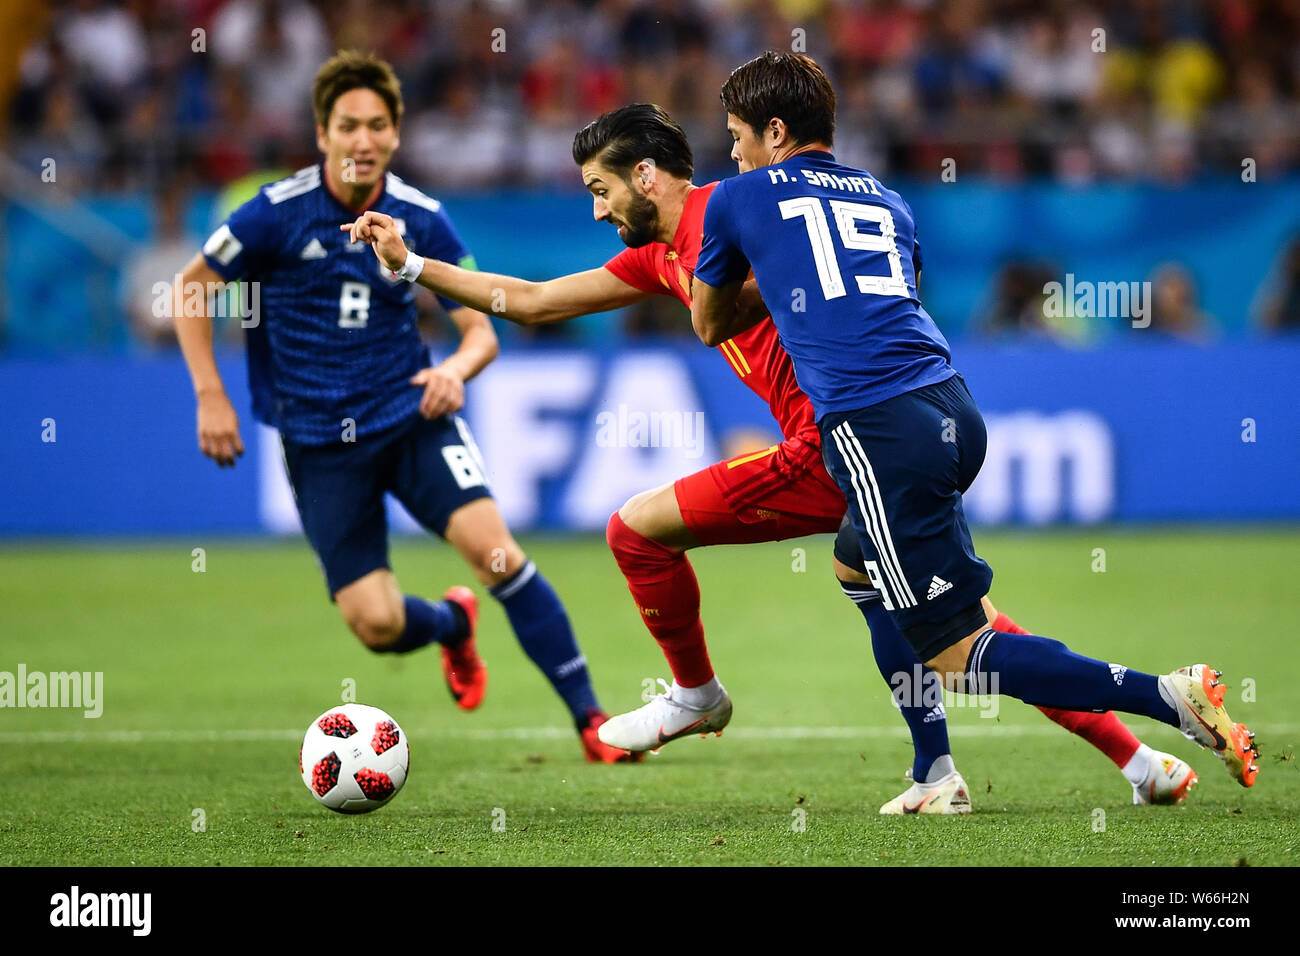 Yannick Carrasco of Belgium, center, challenges Genki Haraguchi and Hiroki Sakai of Japan in their Round of 16 match during the 2018 FIFA World Cup in Stock Photo